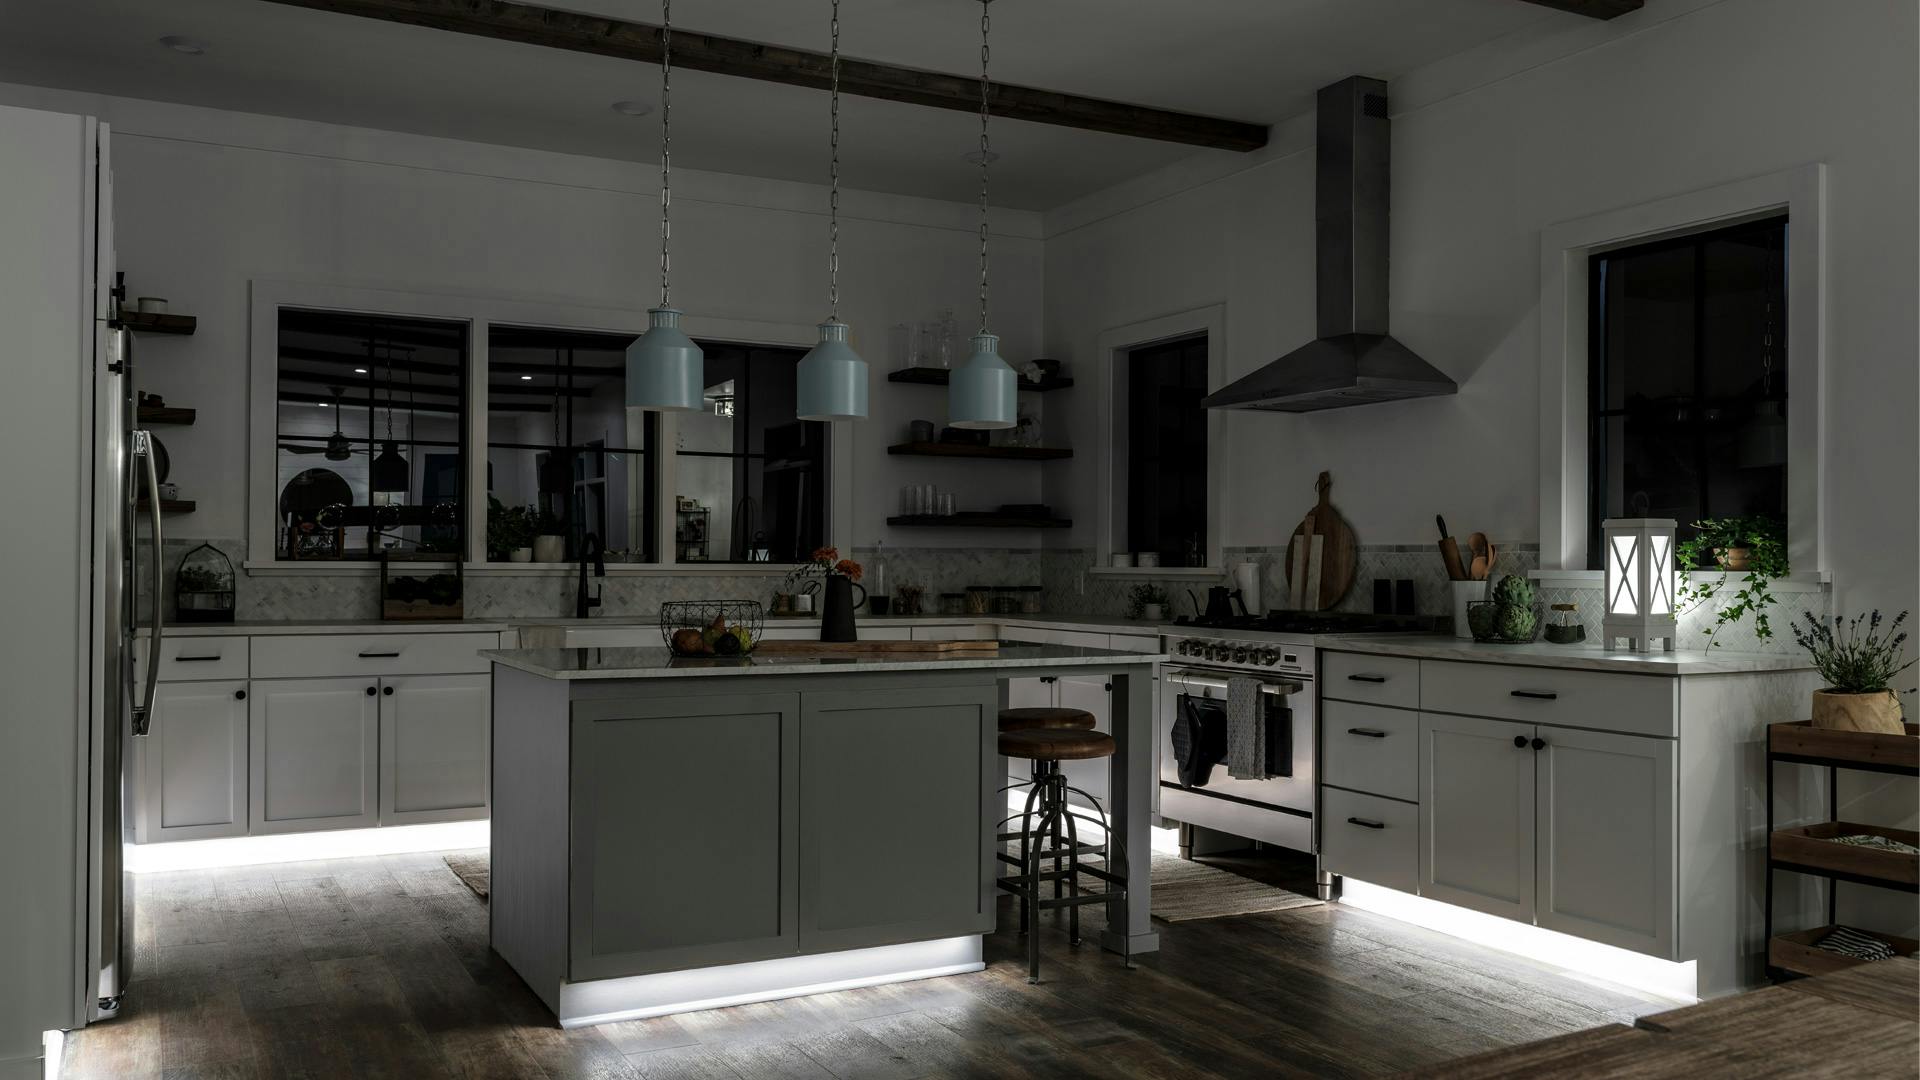 A kitchen with tape lights and Montauk pendants with just the kick toe lighting on at night 